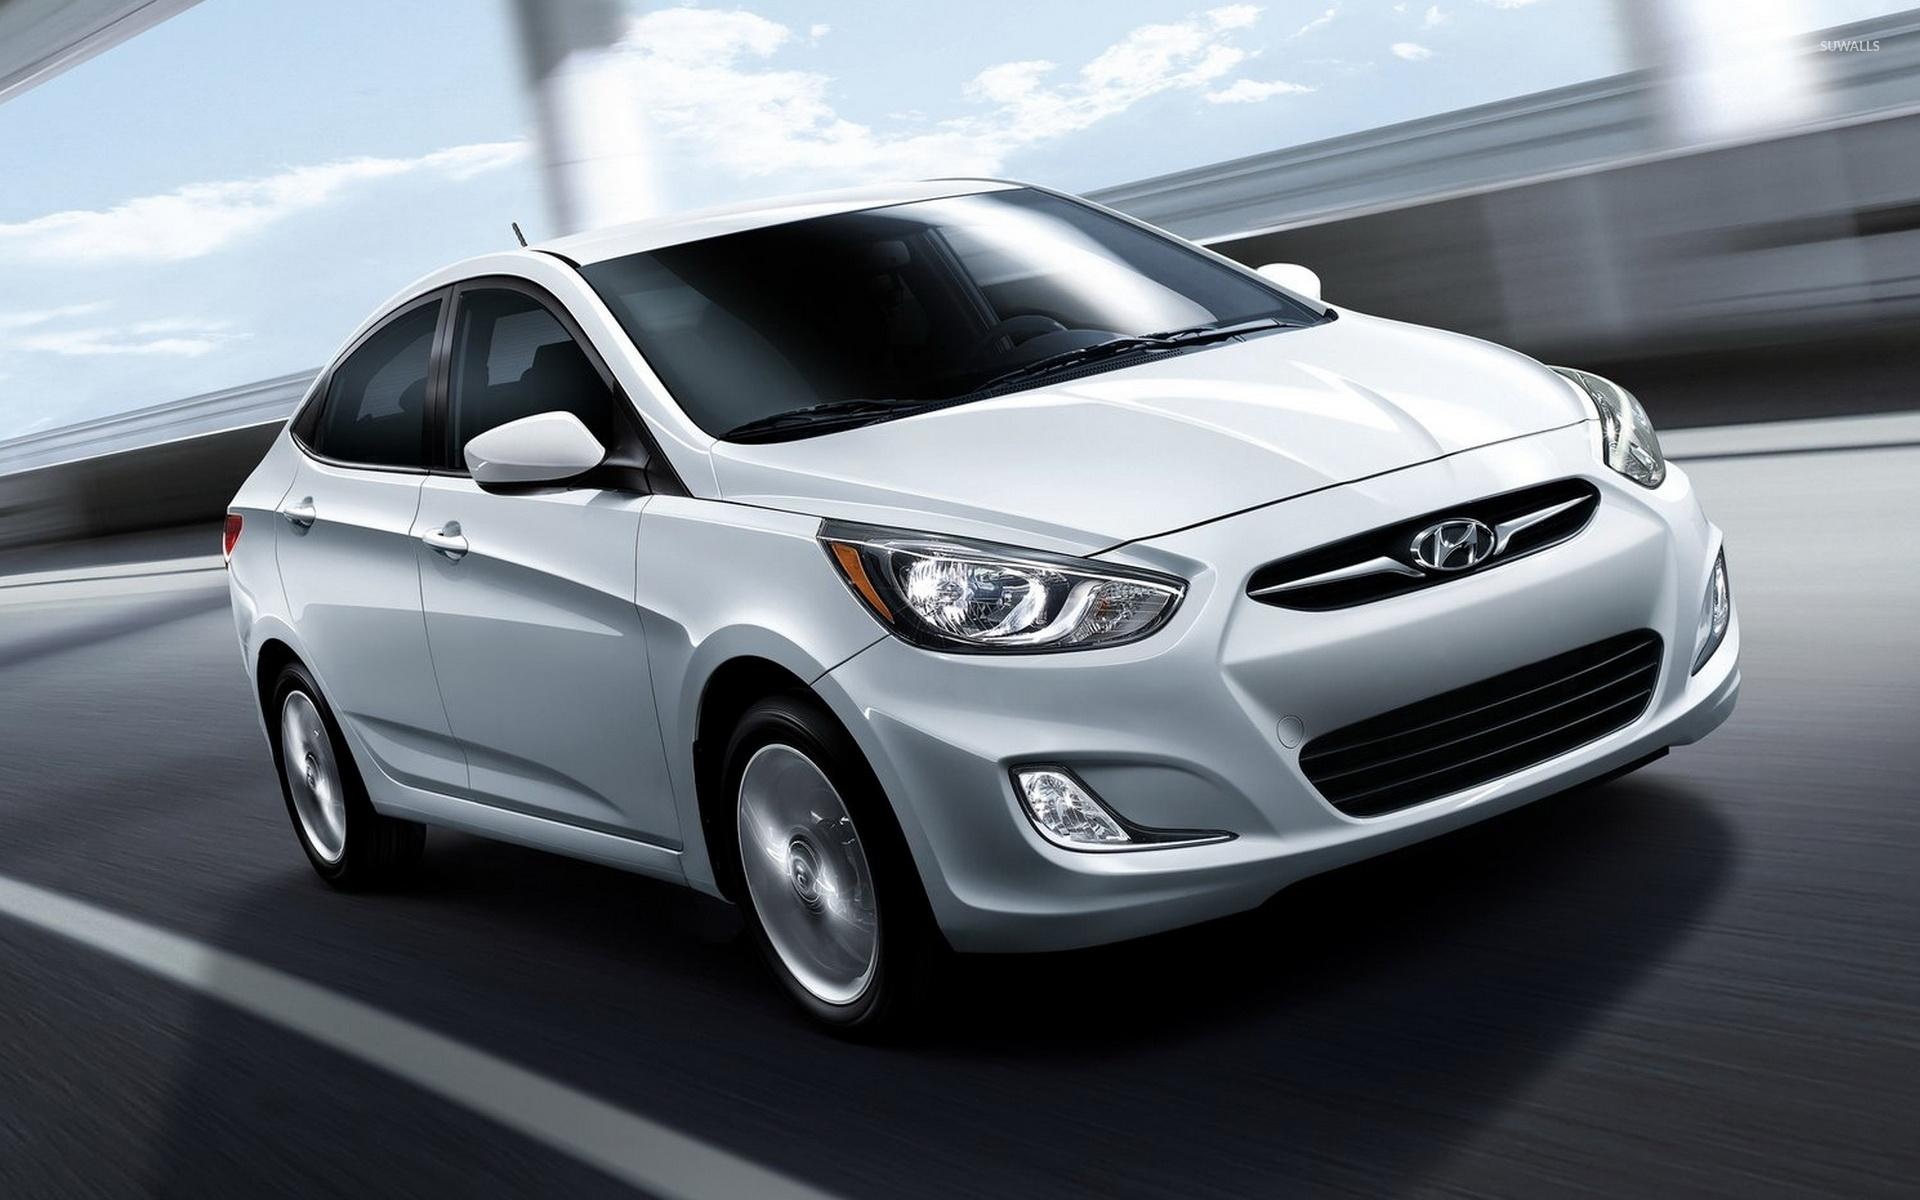 Hyundai Accent wallpapers, Auto backgrounds, Top free, Accent, 1920x1200 HD Desktop